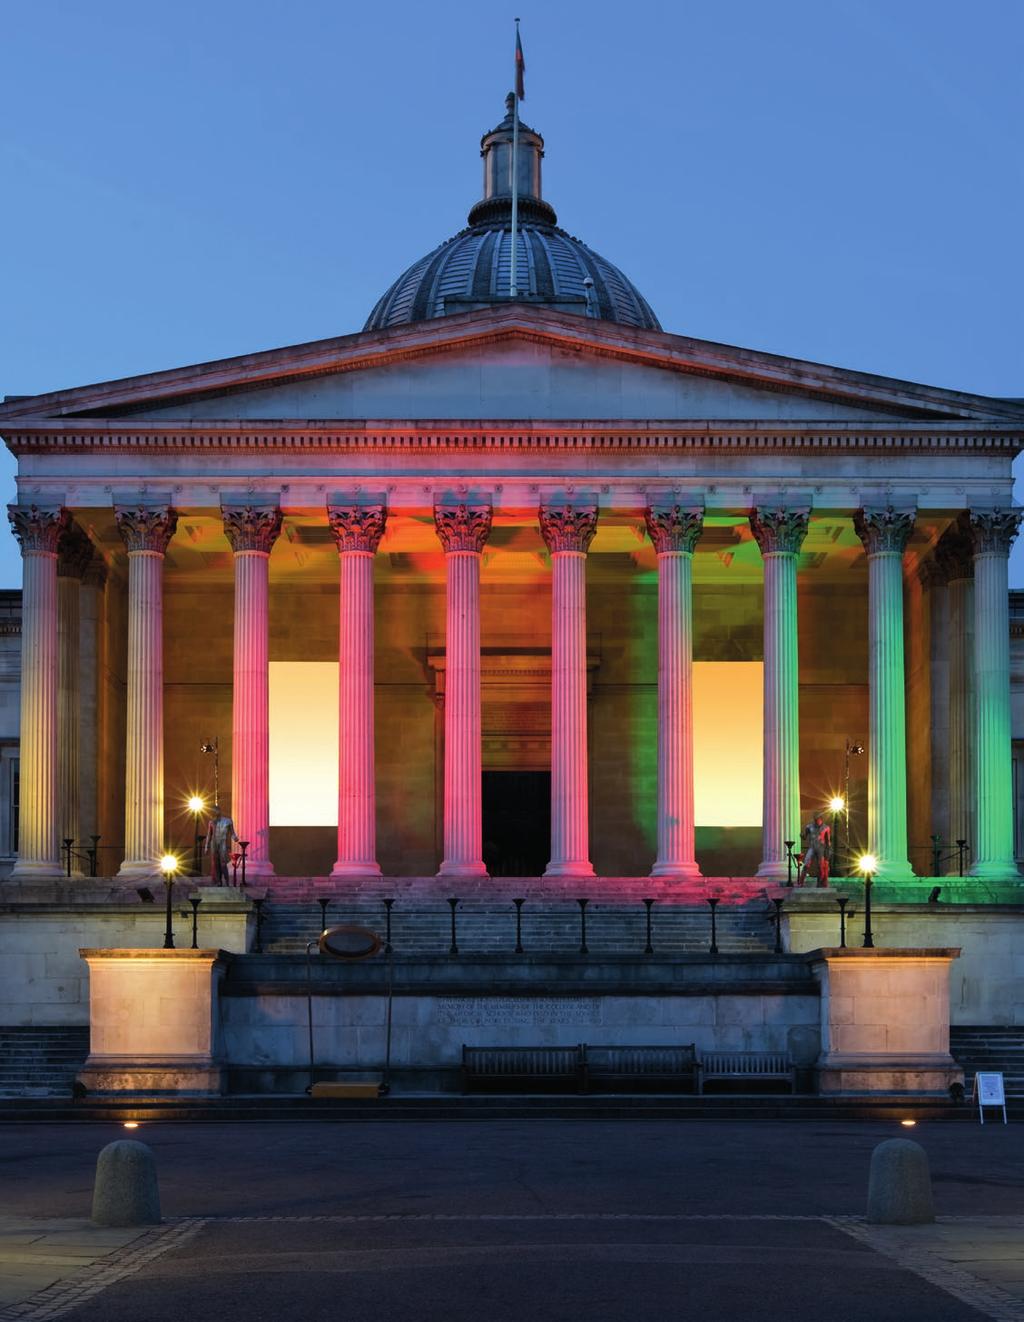 University College London, London, UK Founded in 1826,